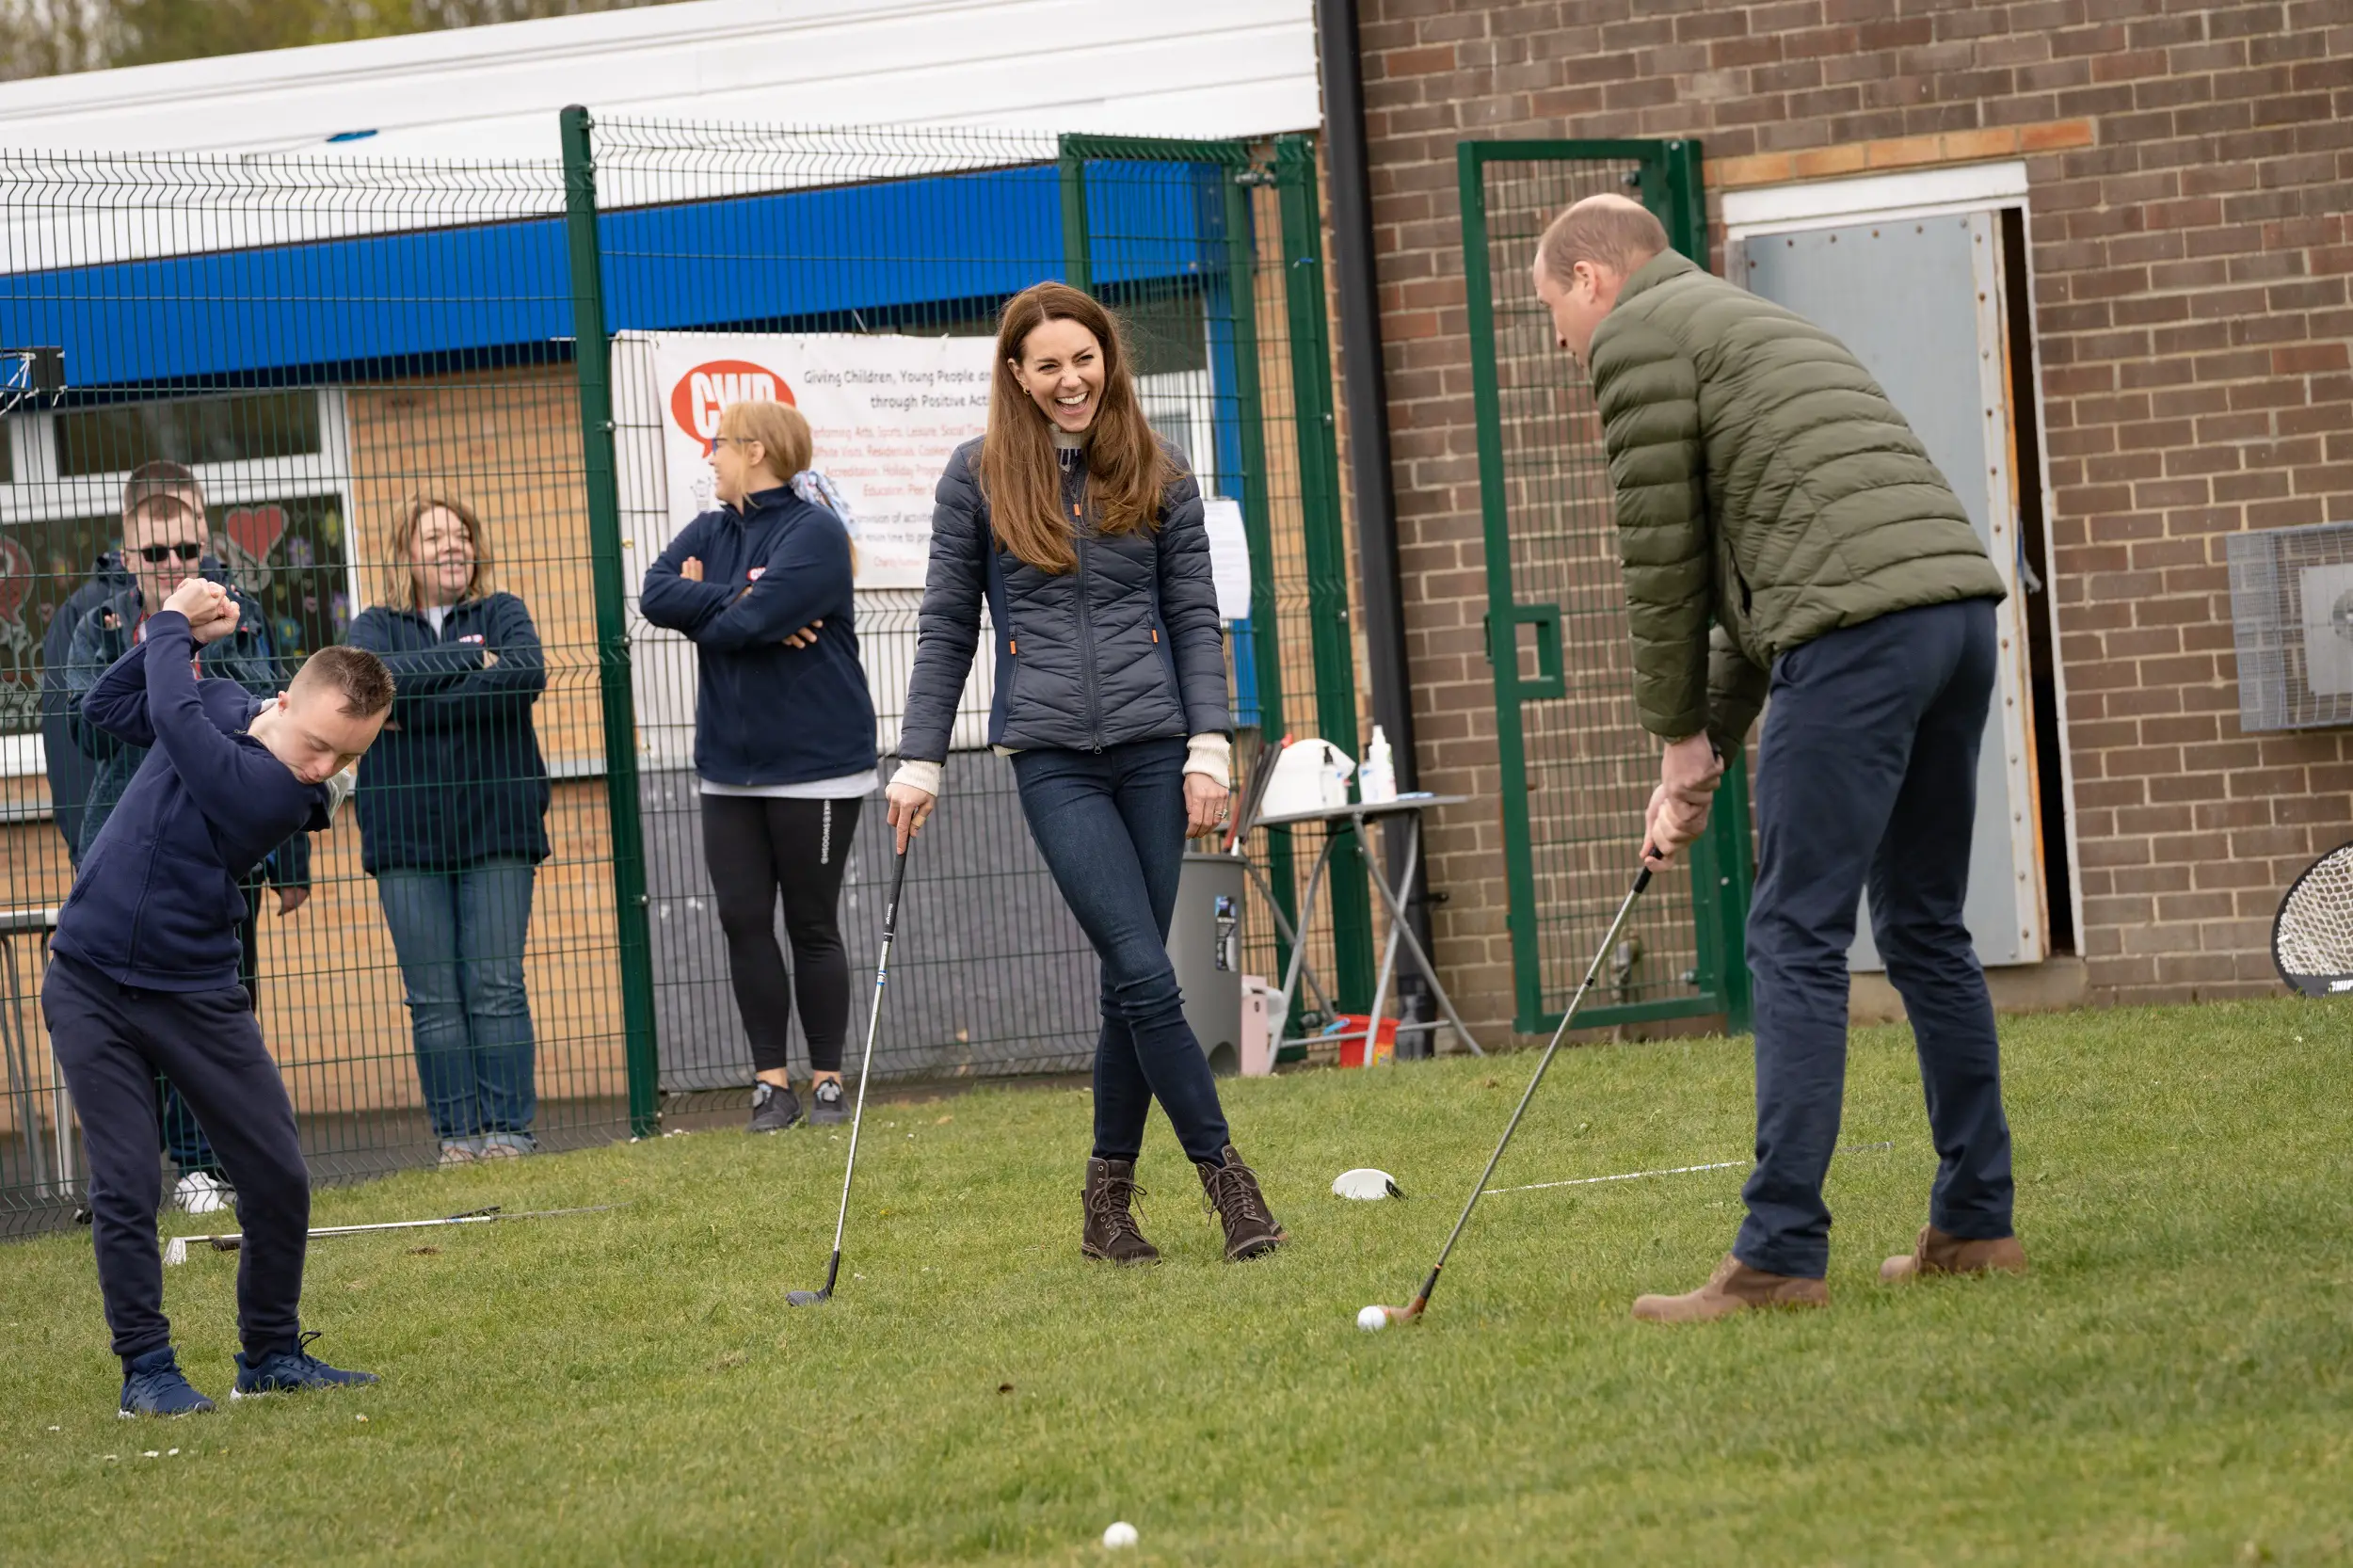 The Duke and Duchess of Cambridge played golf with children